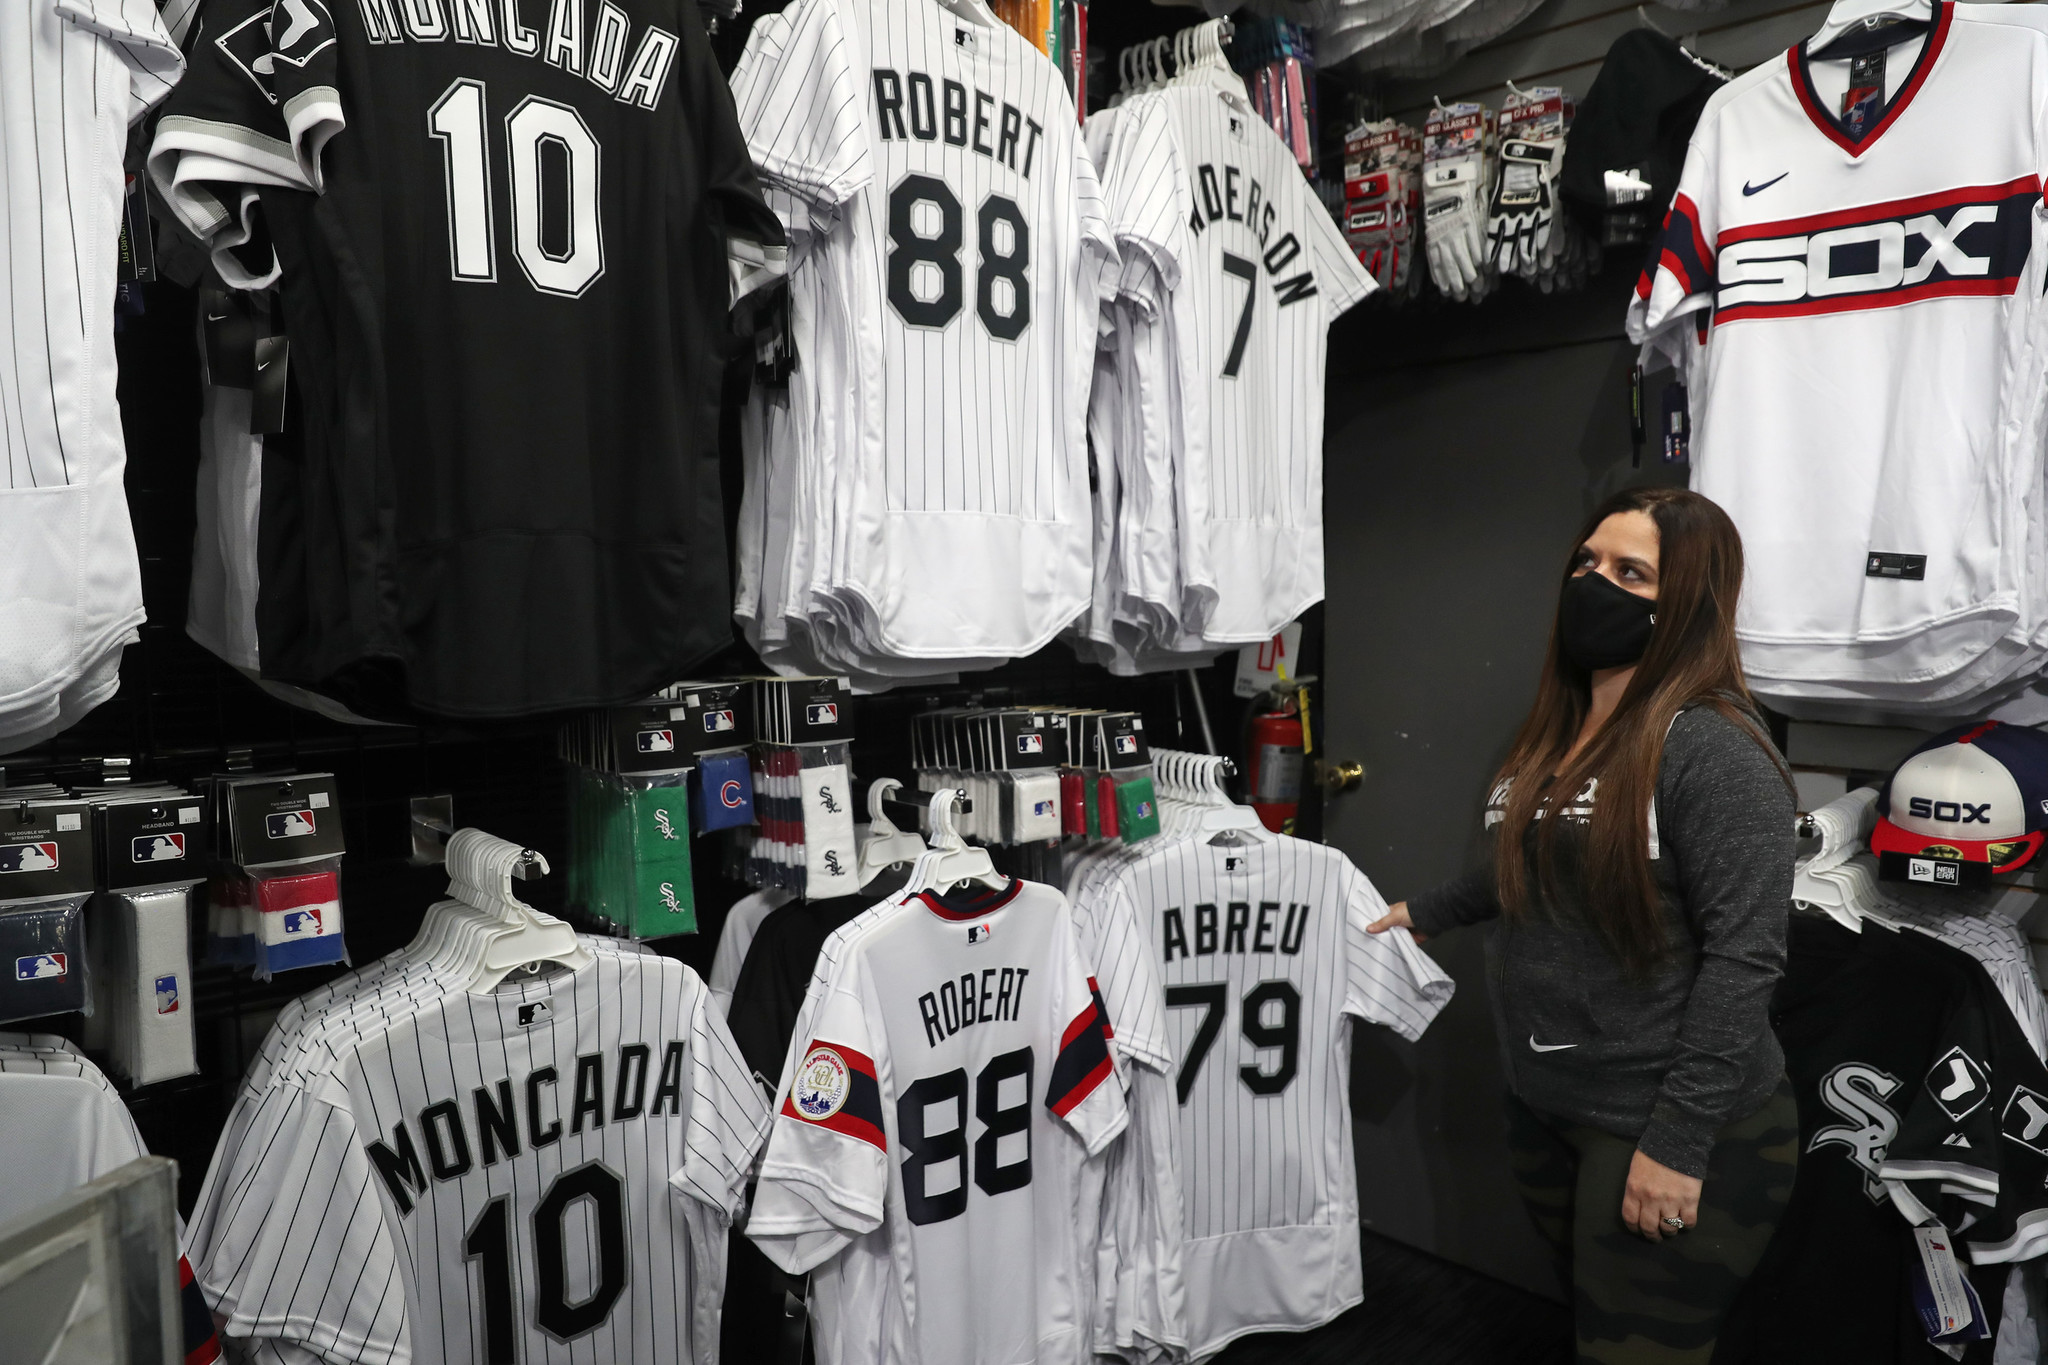 Chicago White Sox: Family traditions at the ballpark